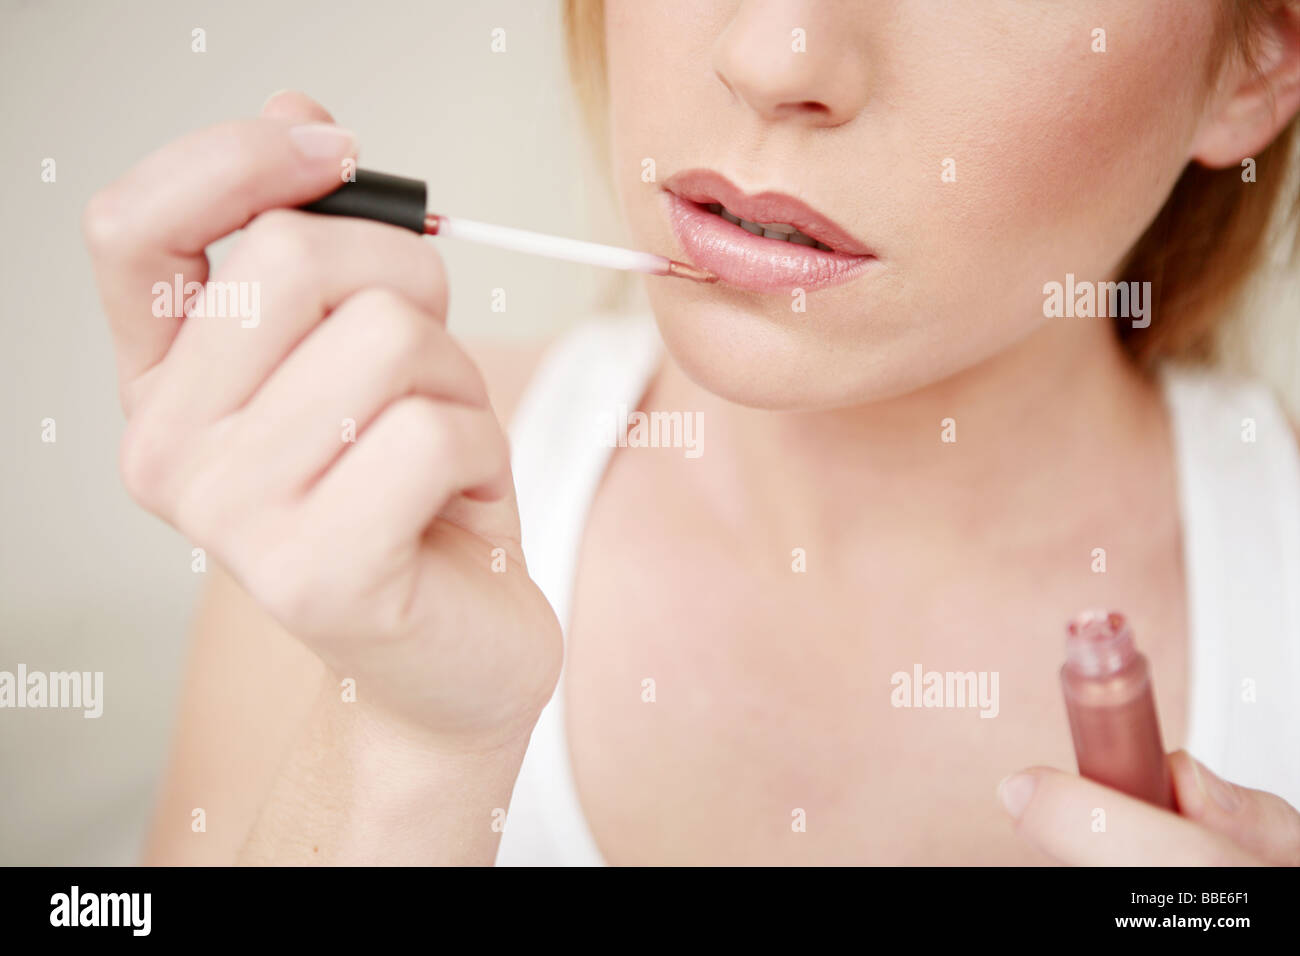 Cut out of young beauty woman's face applying lip gloss on lips Stock Photo